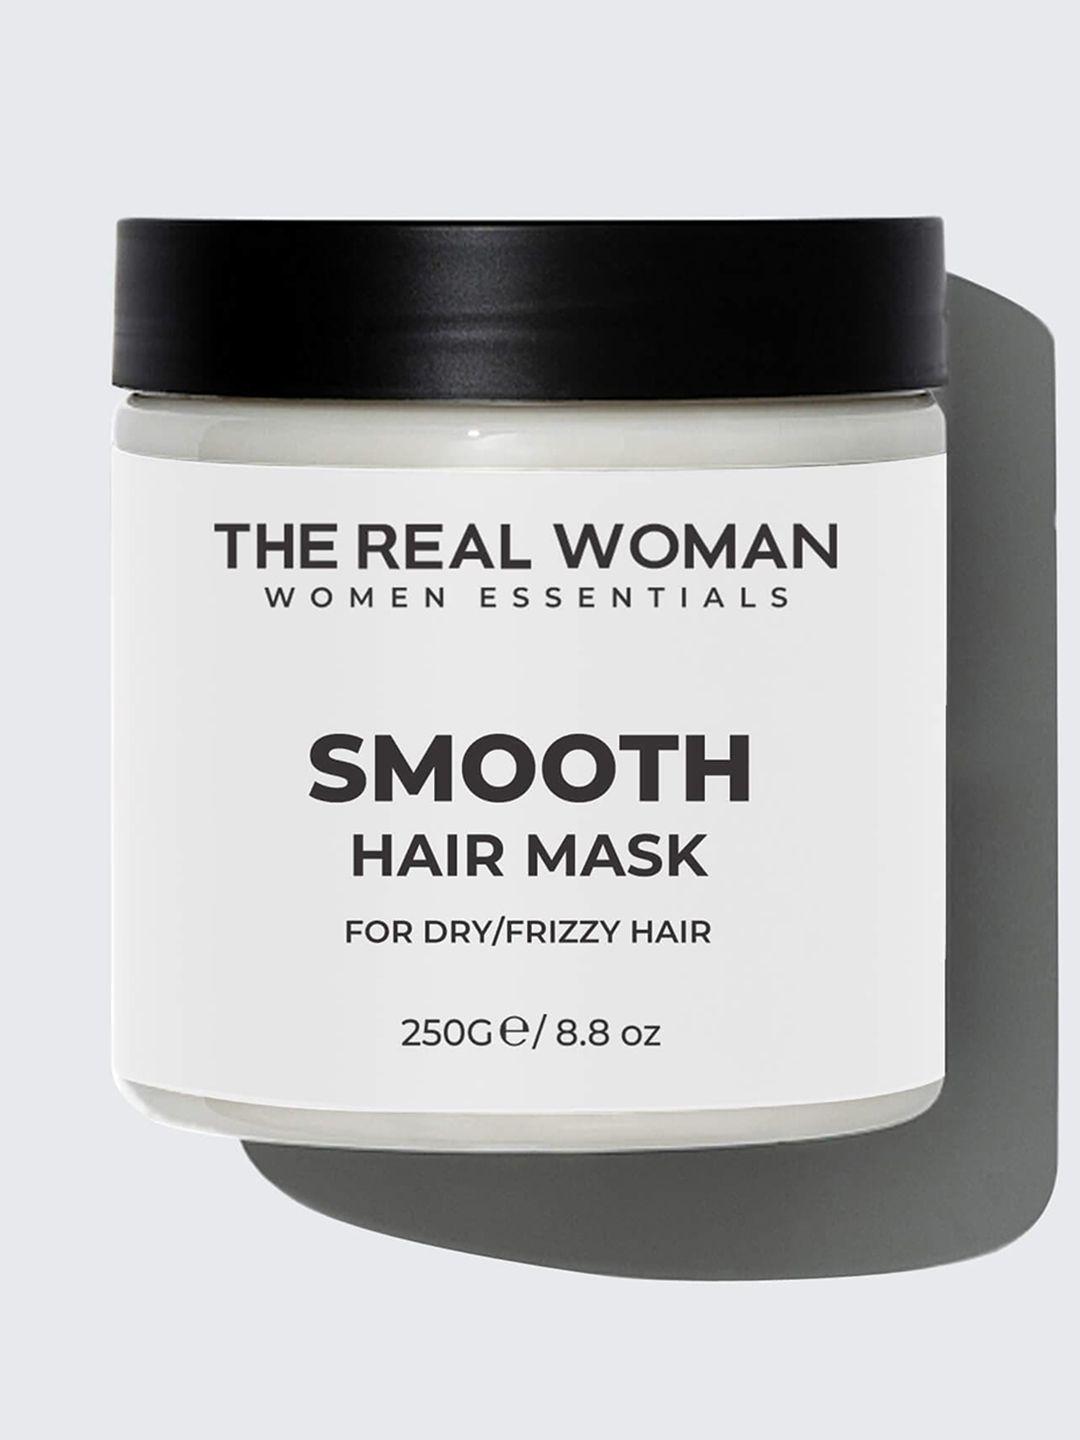 the real woman smooth hair mask for dry+frizzy hair - 250 gm